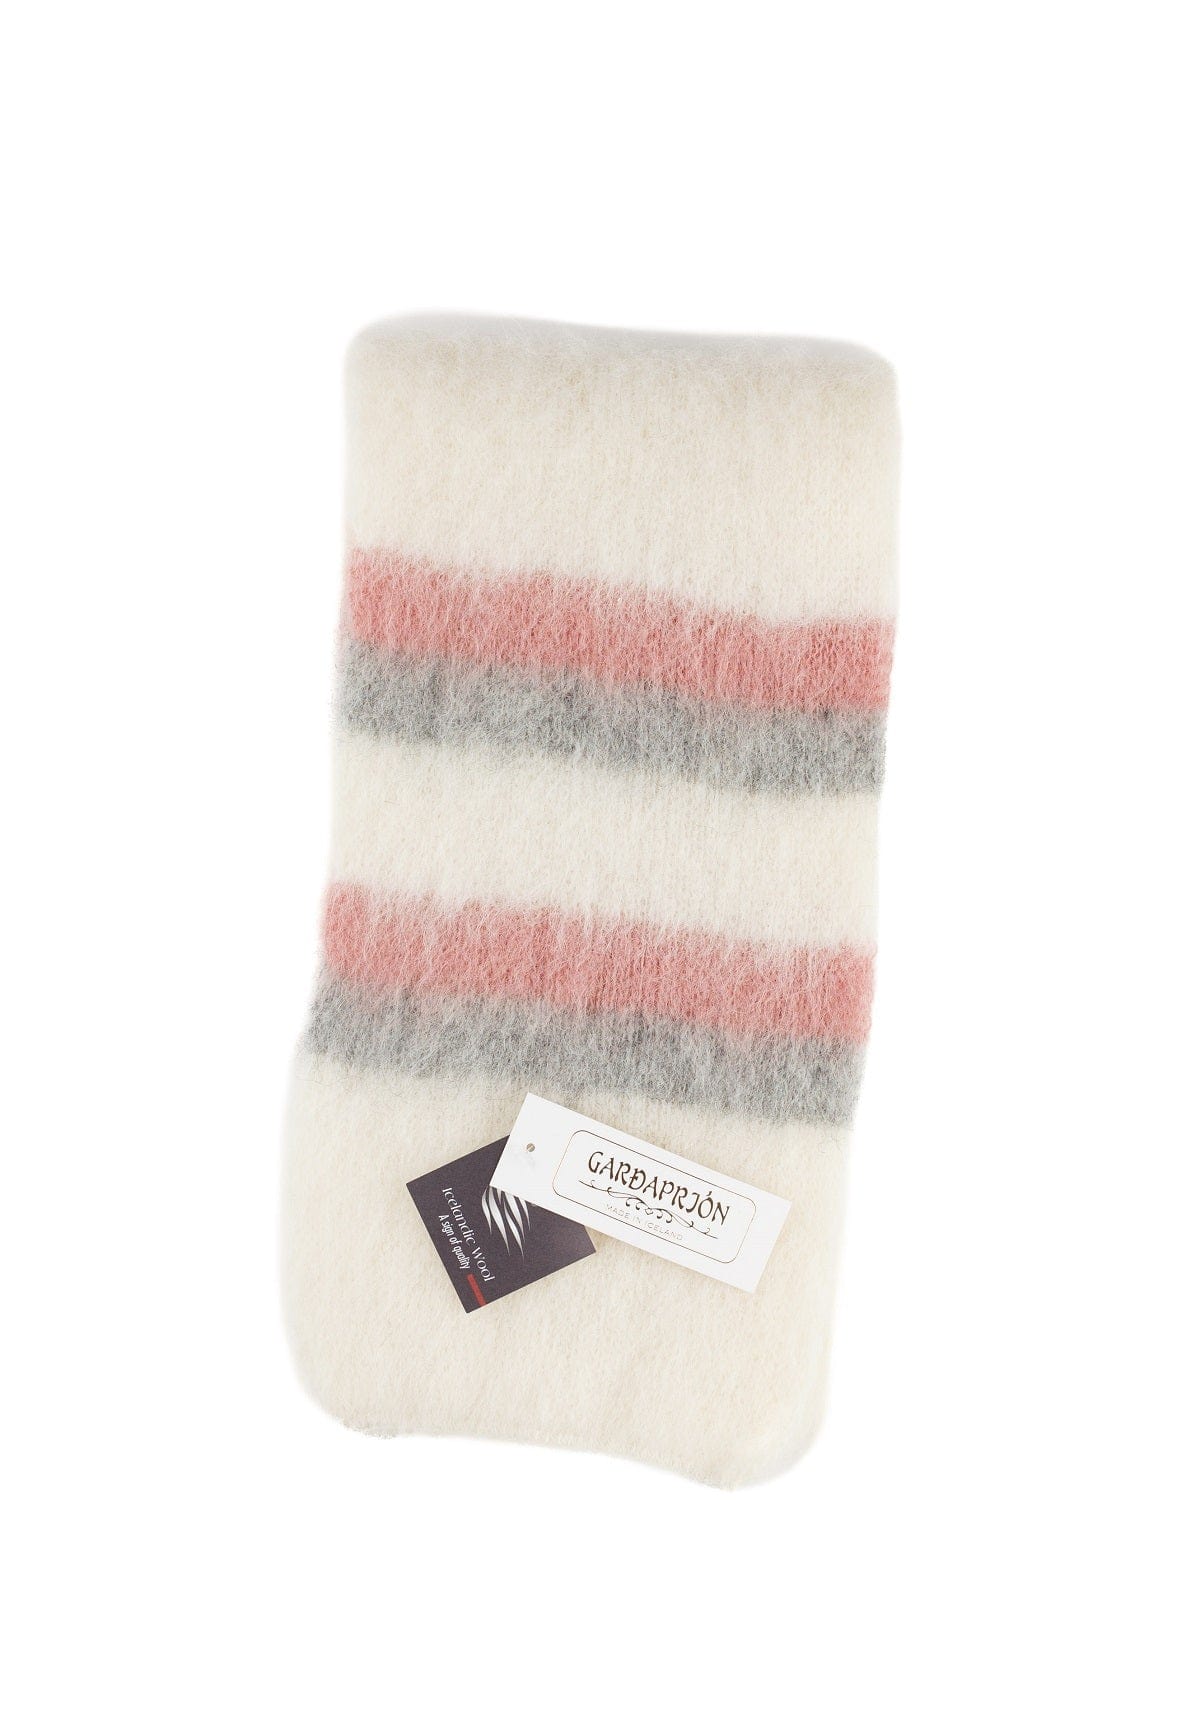 Brushed Wool - White scarf with pink and grey stripes - The Icelandic Store